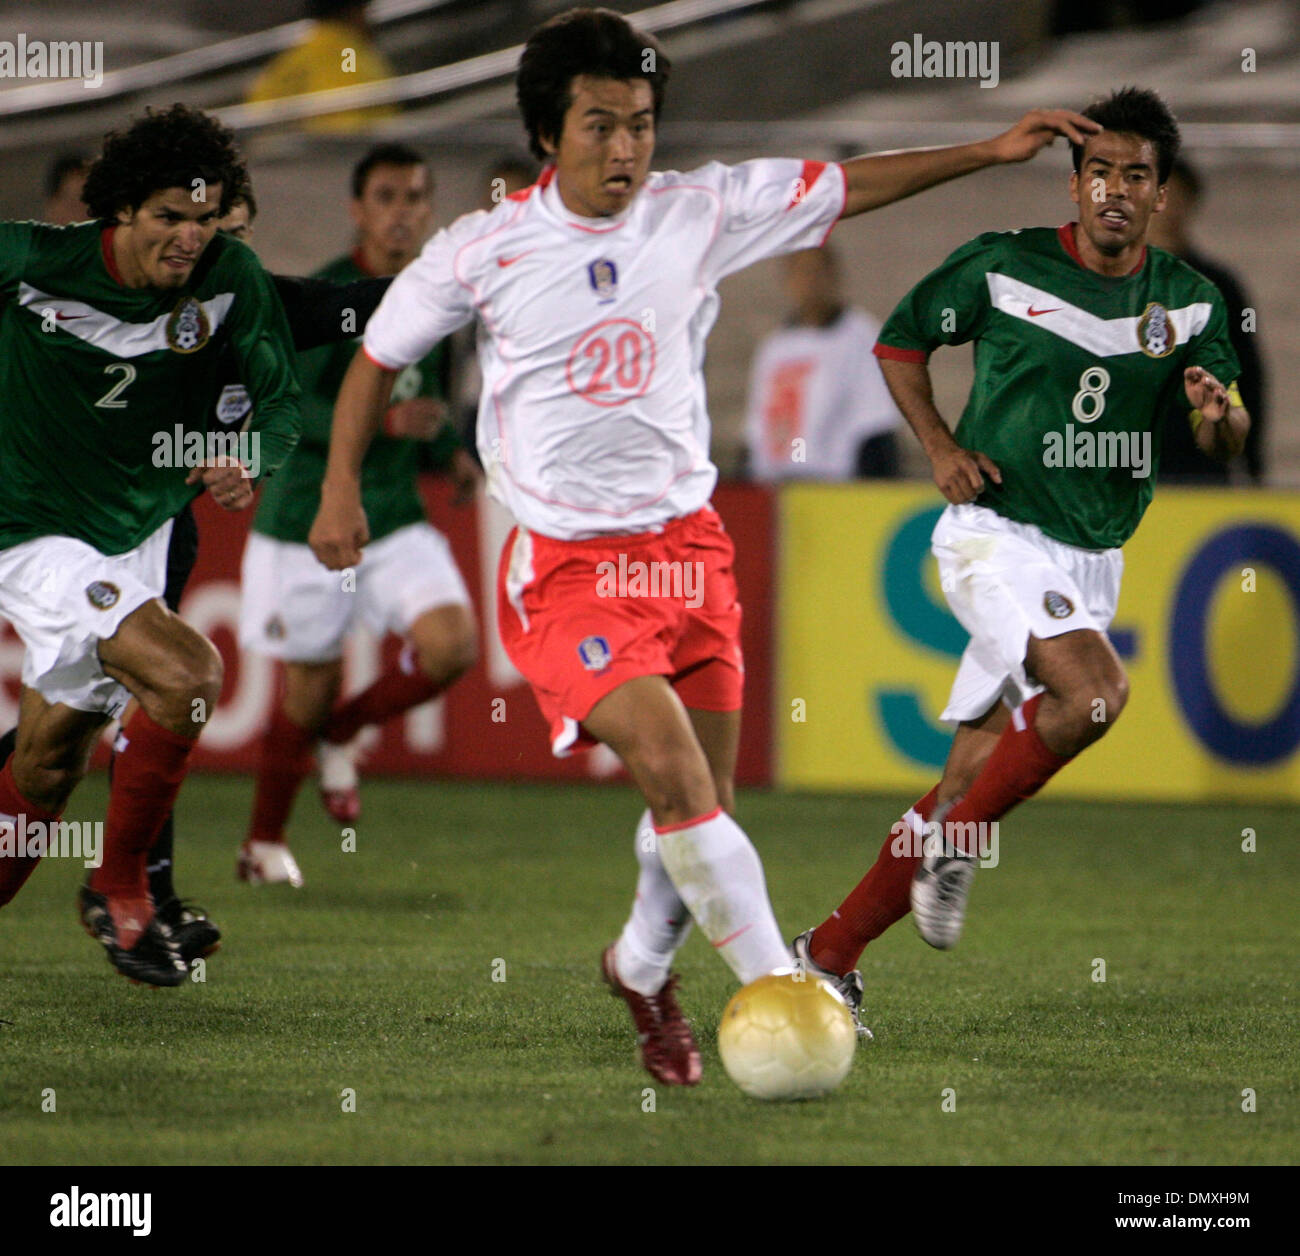 Feb 15, 2006; Los Angeles, CA, USA; SOCCER: (20)  Dong-gook Lee of the Korea Republic National Team charges with the ball while being pursued by defenders (2) Francisco Rodriguez and (8) Pavel Pardo of the National Team of Mexico during their tune up match prior to the world cup at the Los Angeles Memorial Coliseum Wednesday 15 February 2006. Korea won the game 1-0. Mandatory Credi Stock Photo